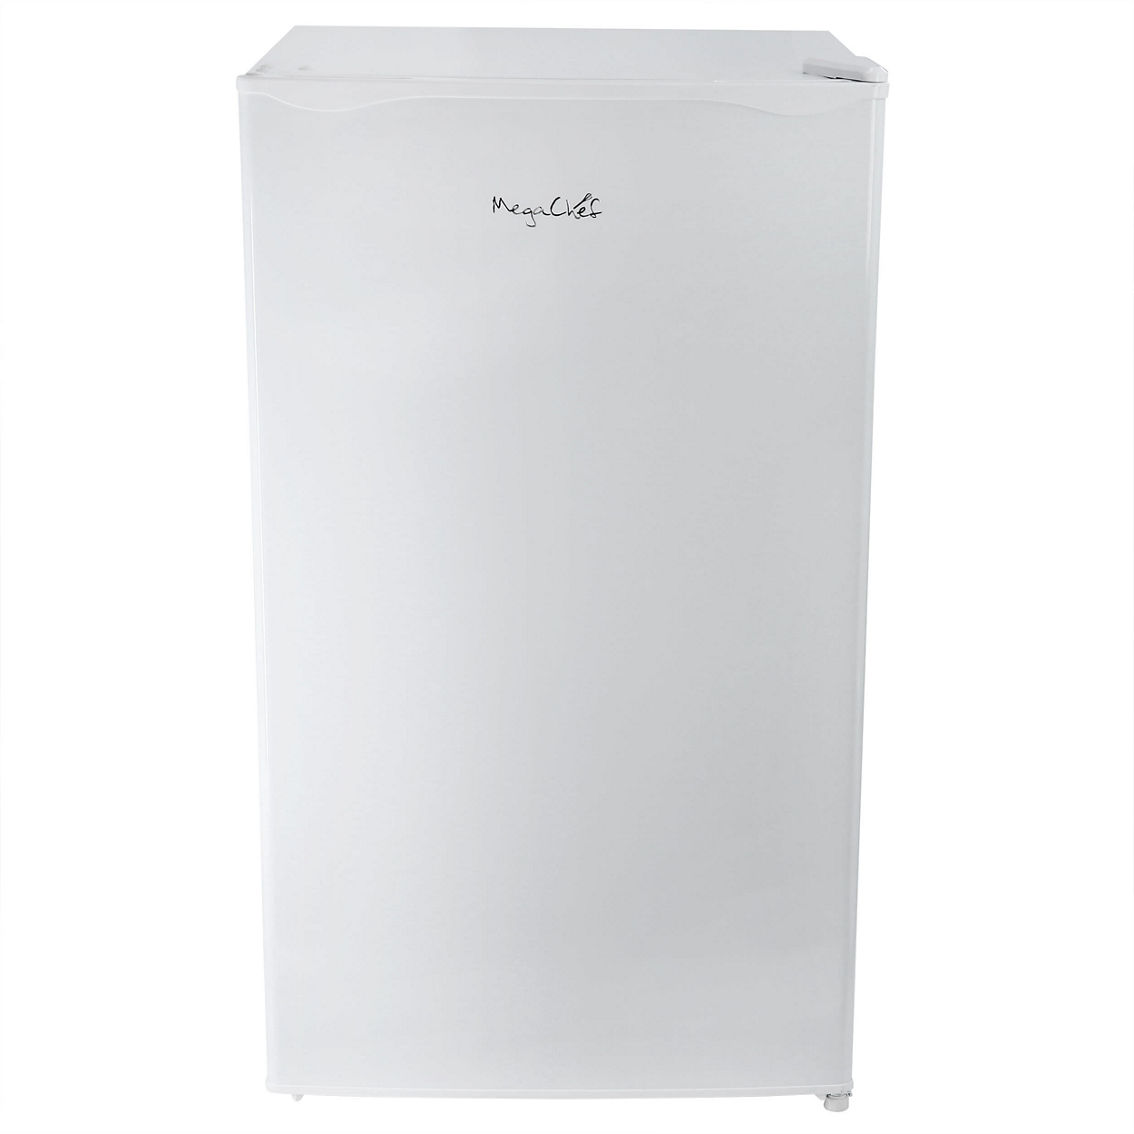 MegaChef 3.2 Cubic Feet Refrigerator in White - Image 3 of 5